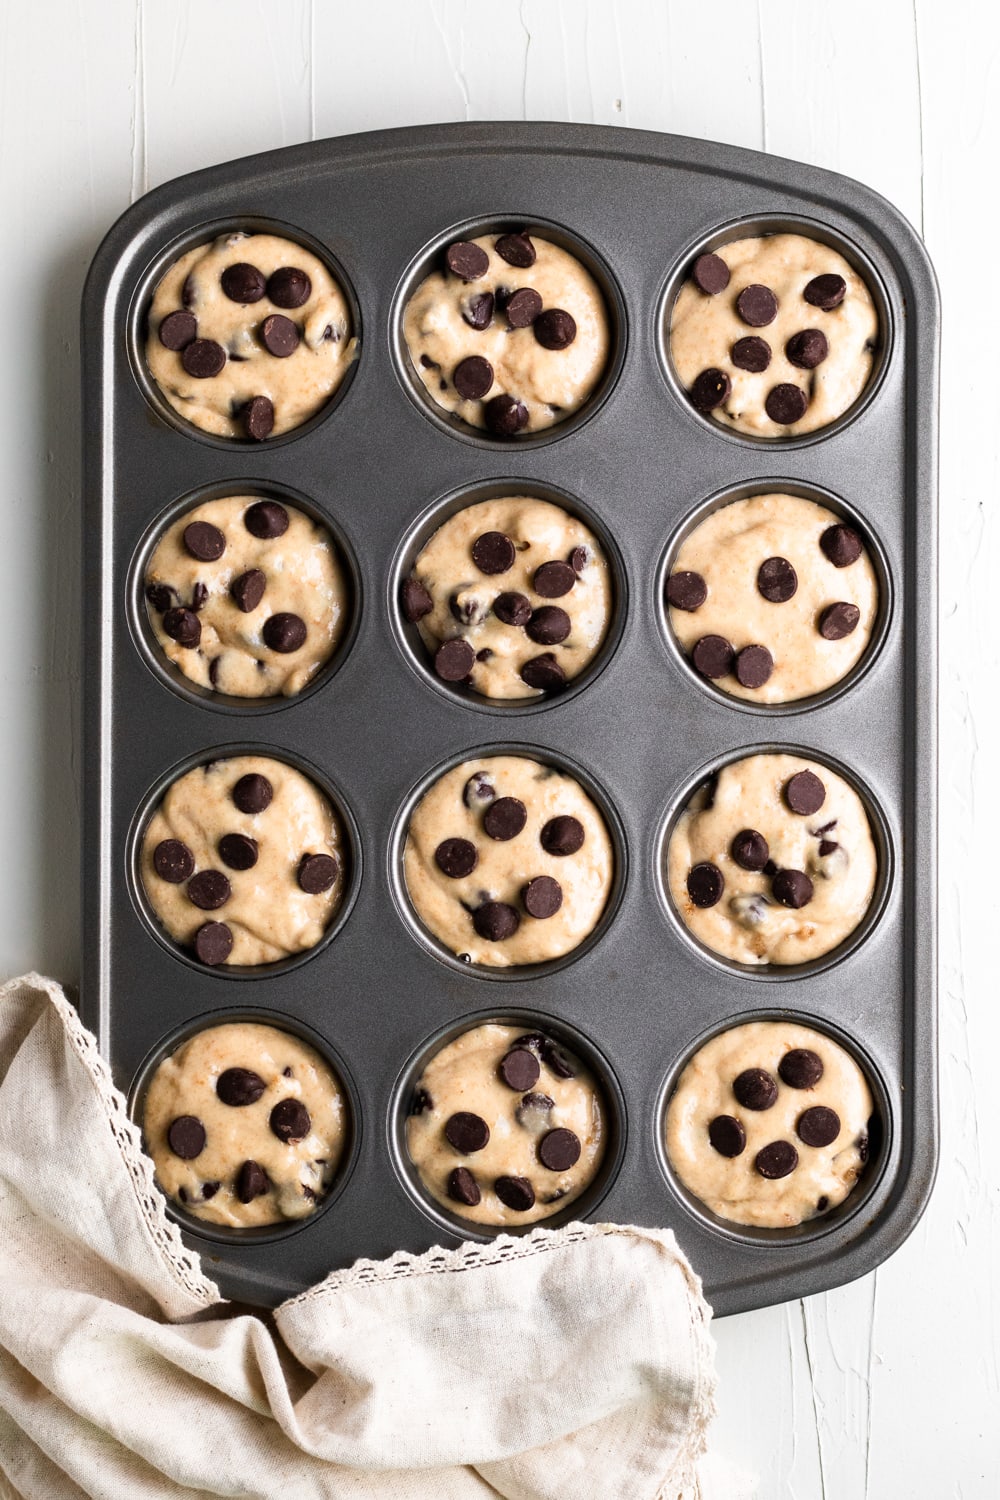 batter in 12 cup muffin tin with chocolate chips on top before baking